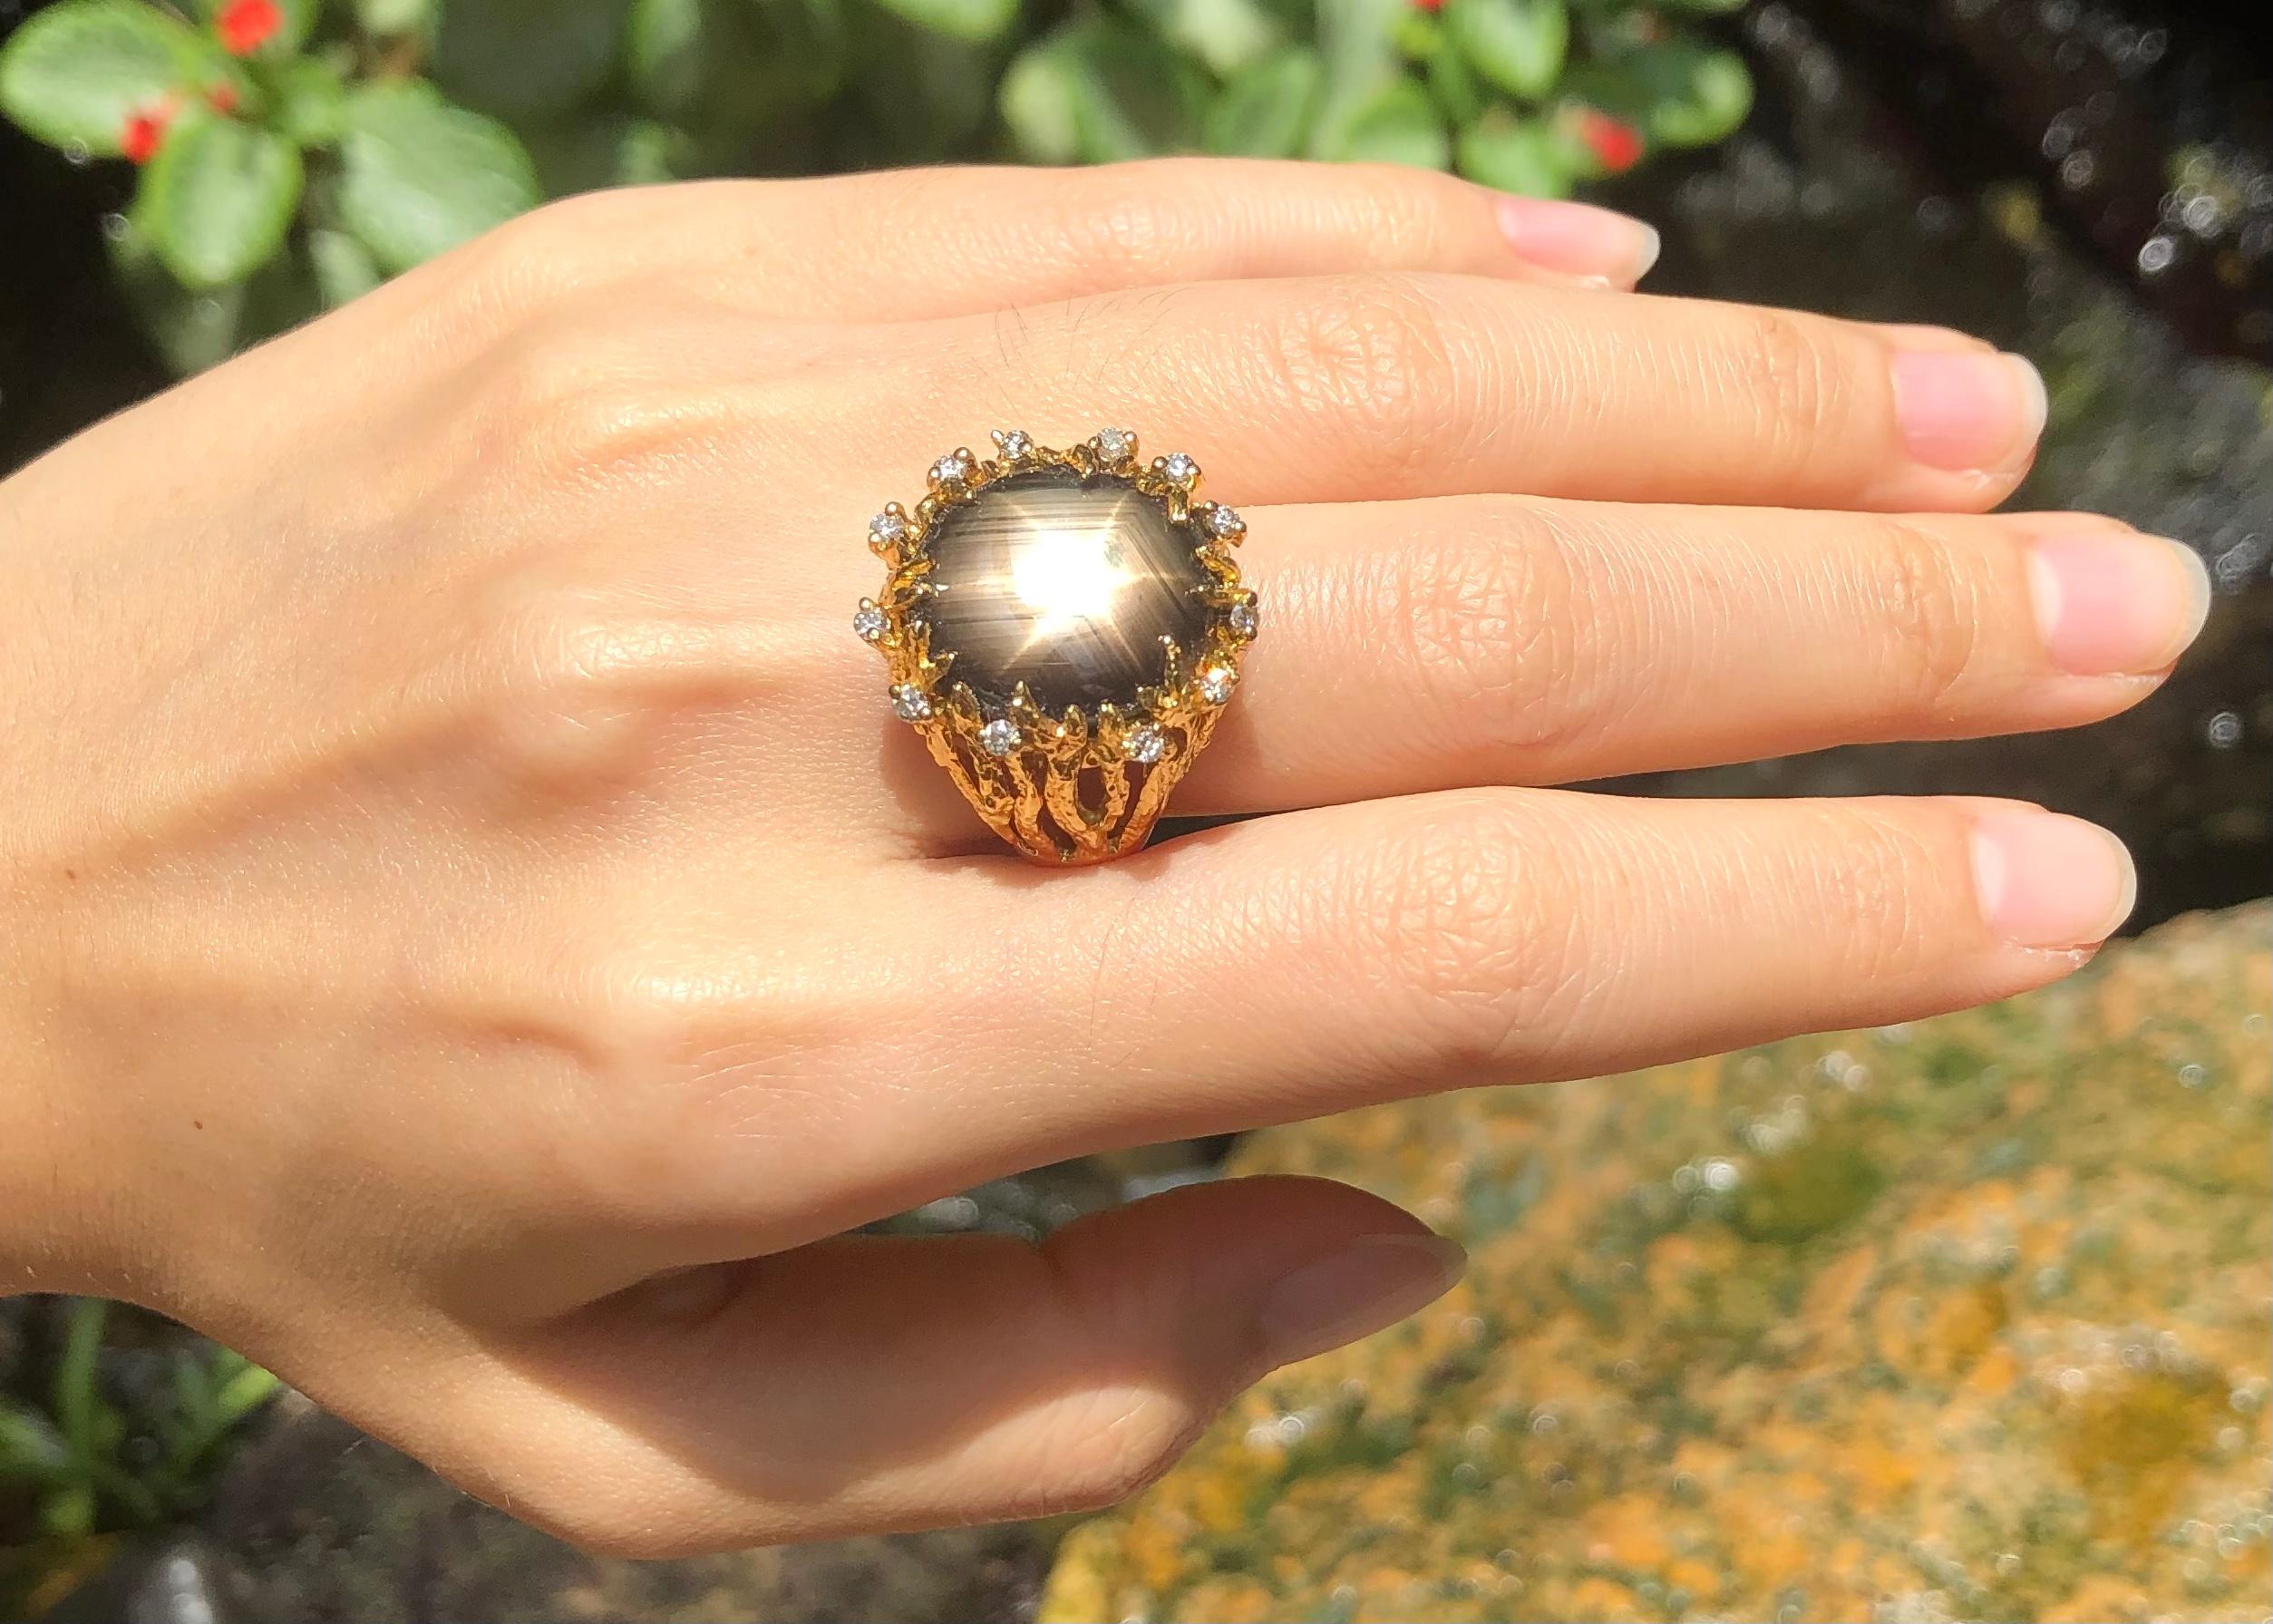 Black Star Sapphire 20.77 carats with Brown Diamond 0.32 carat Ring set in 18 Karat Gold Settings

Width:  2.0 cm 
Length: 2.2  cm
Ring Size: 55
Total Weight: 19.96 grams



